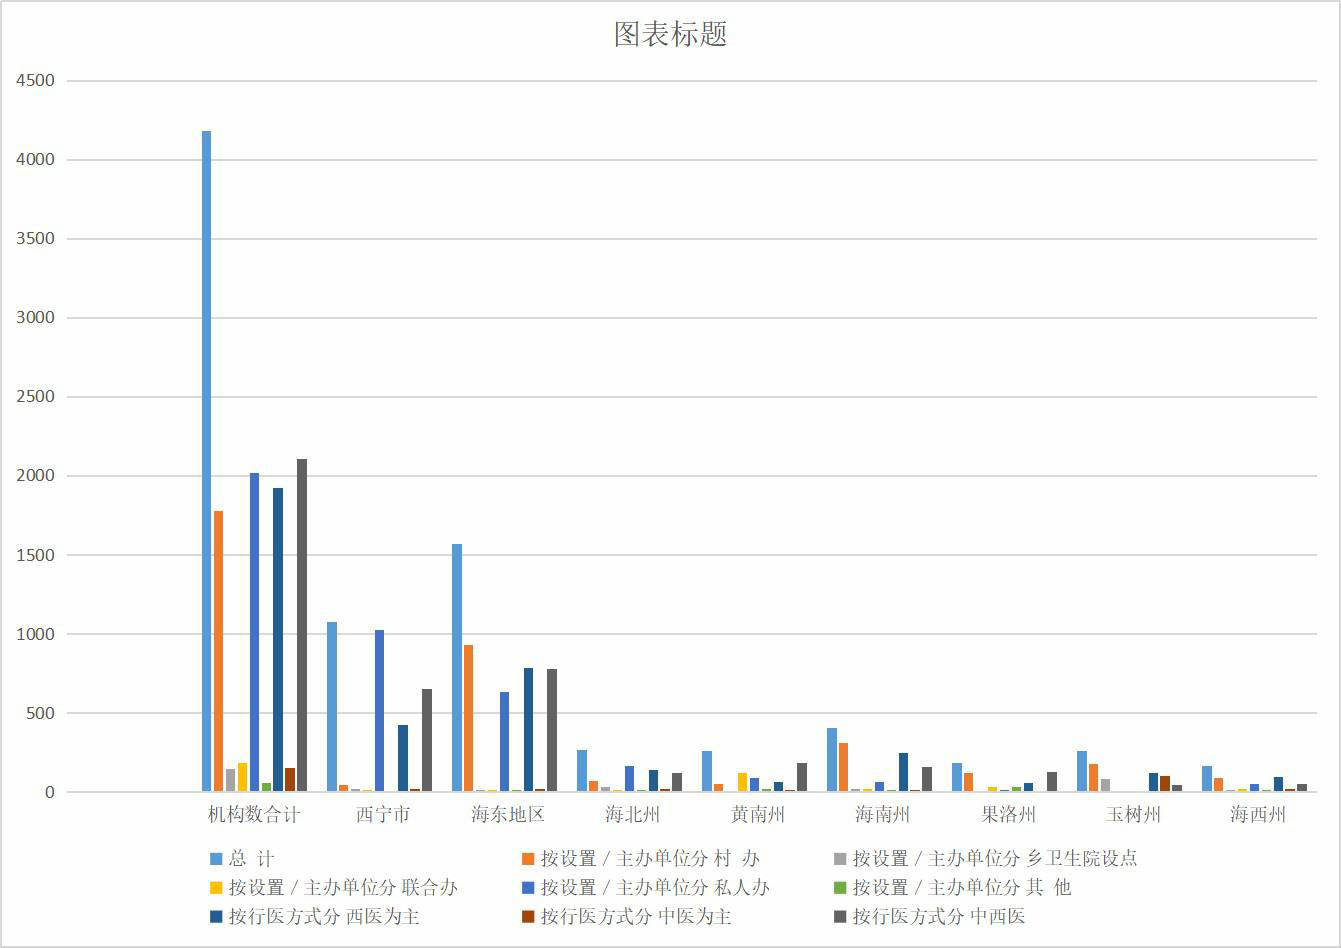 Number of health institutions in counties (districts) and villages of Qinghai Province (2003-2008)